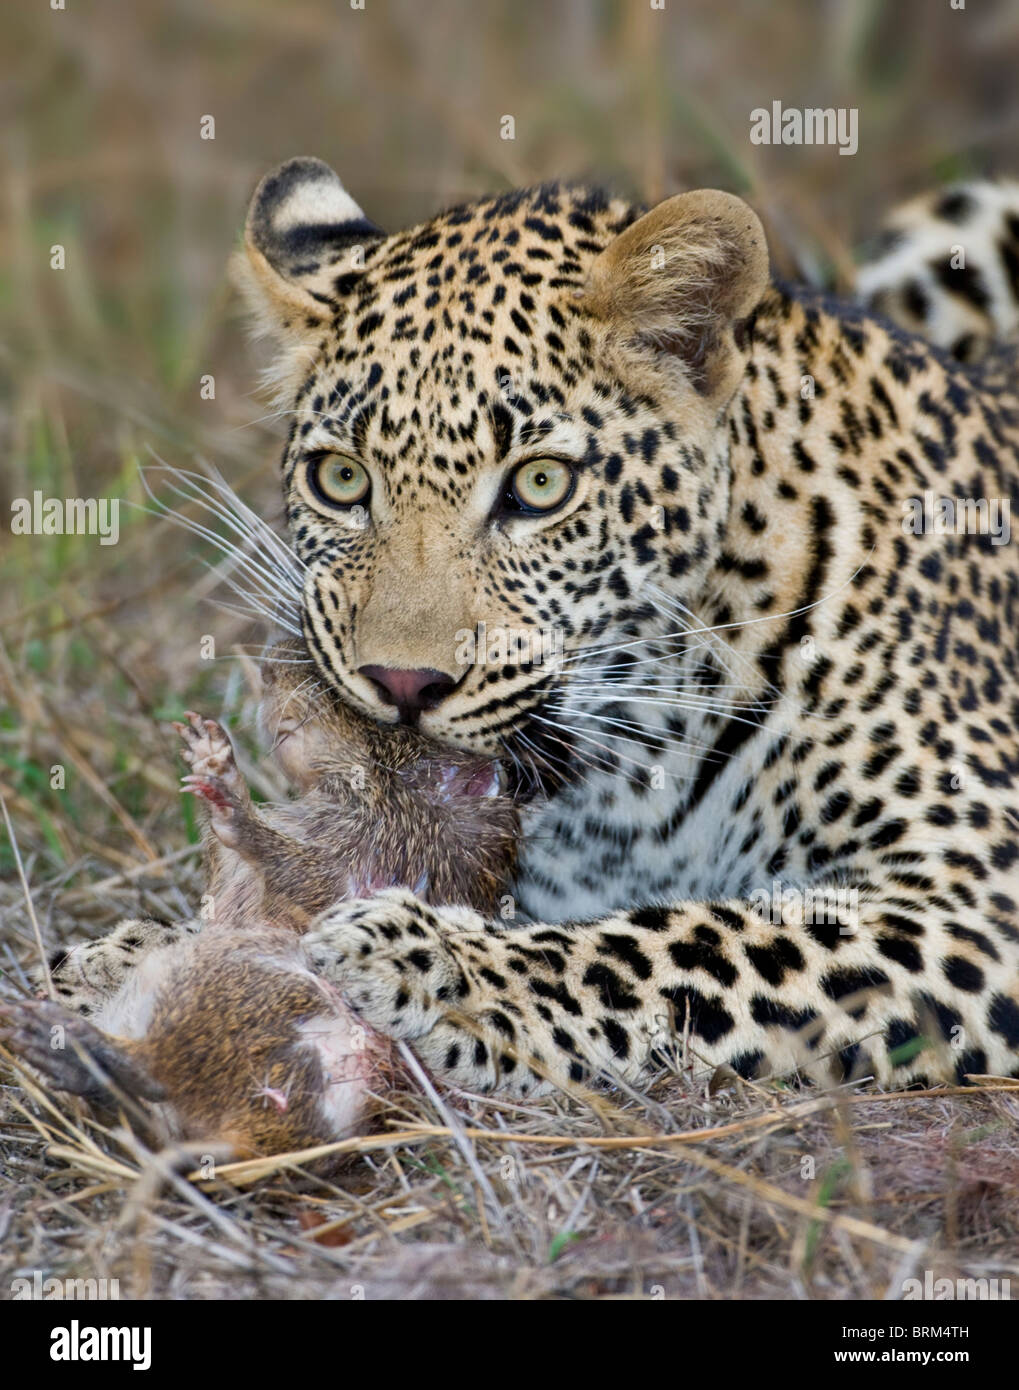 Leopard with small rodent kill Stock Photo